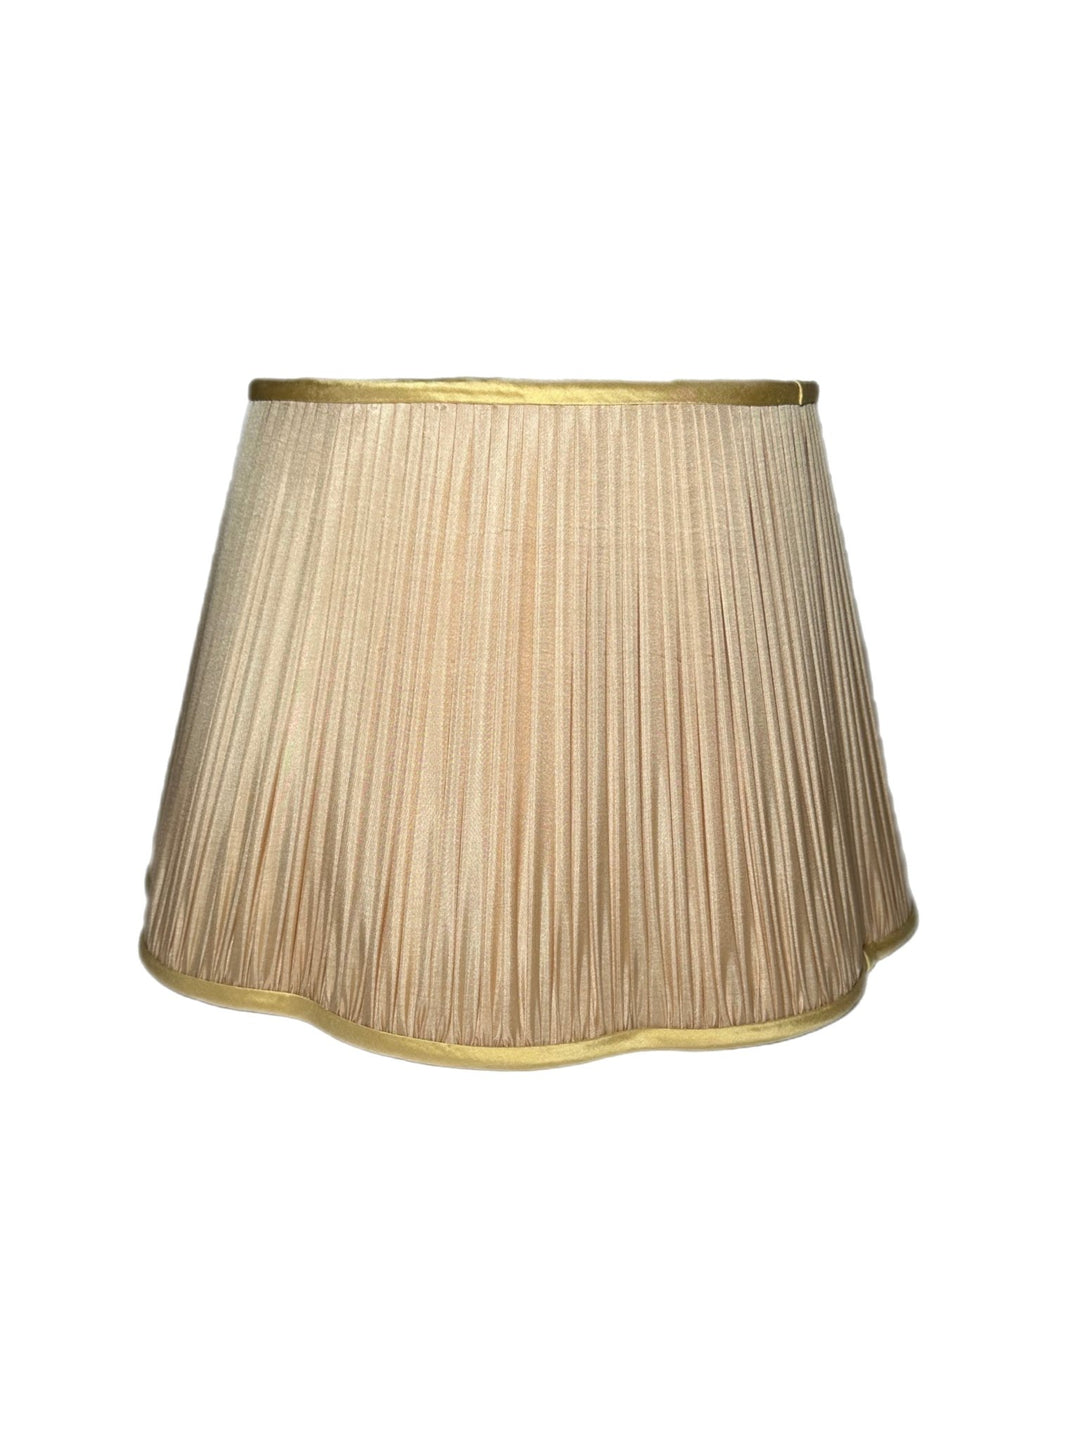 16" Silk Out scalloped - (1) in stock - Lux Lamp Shades